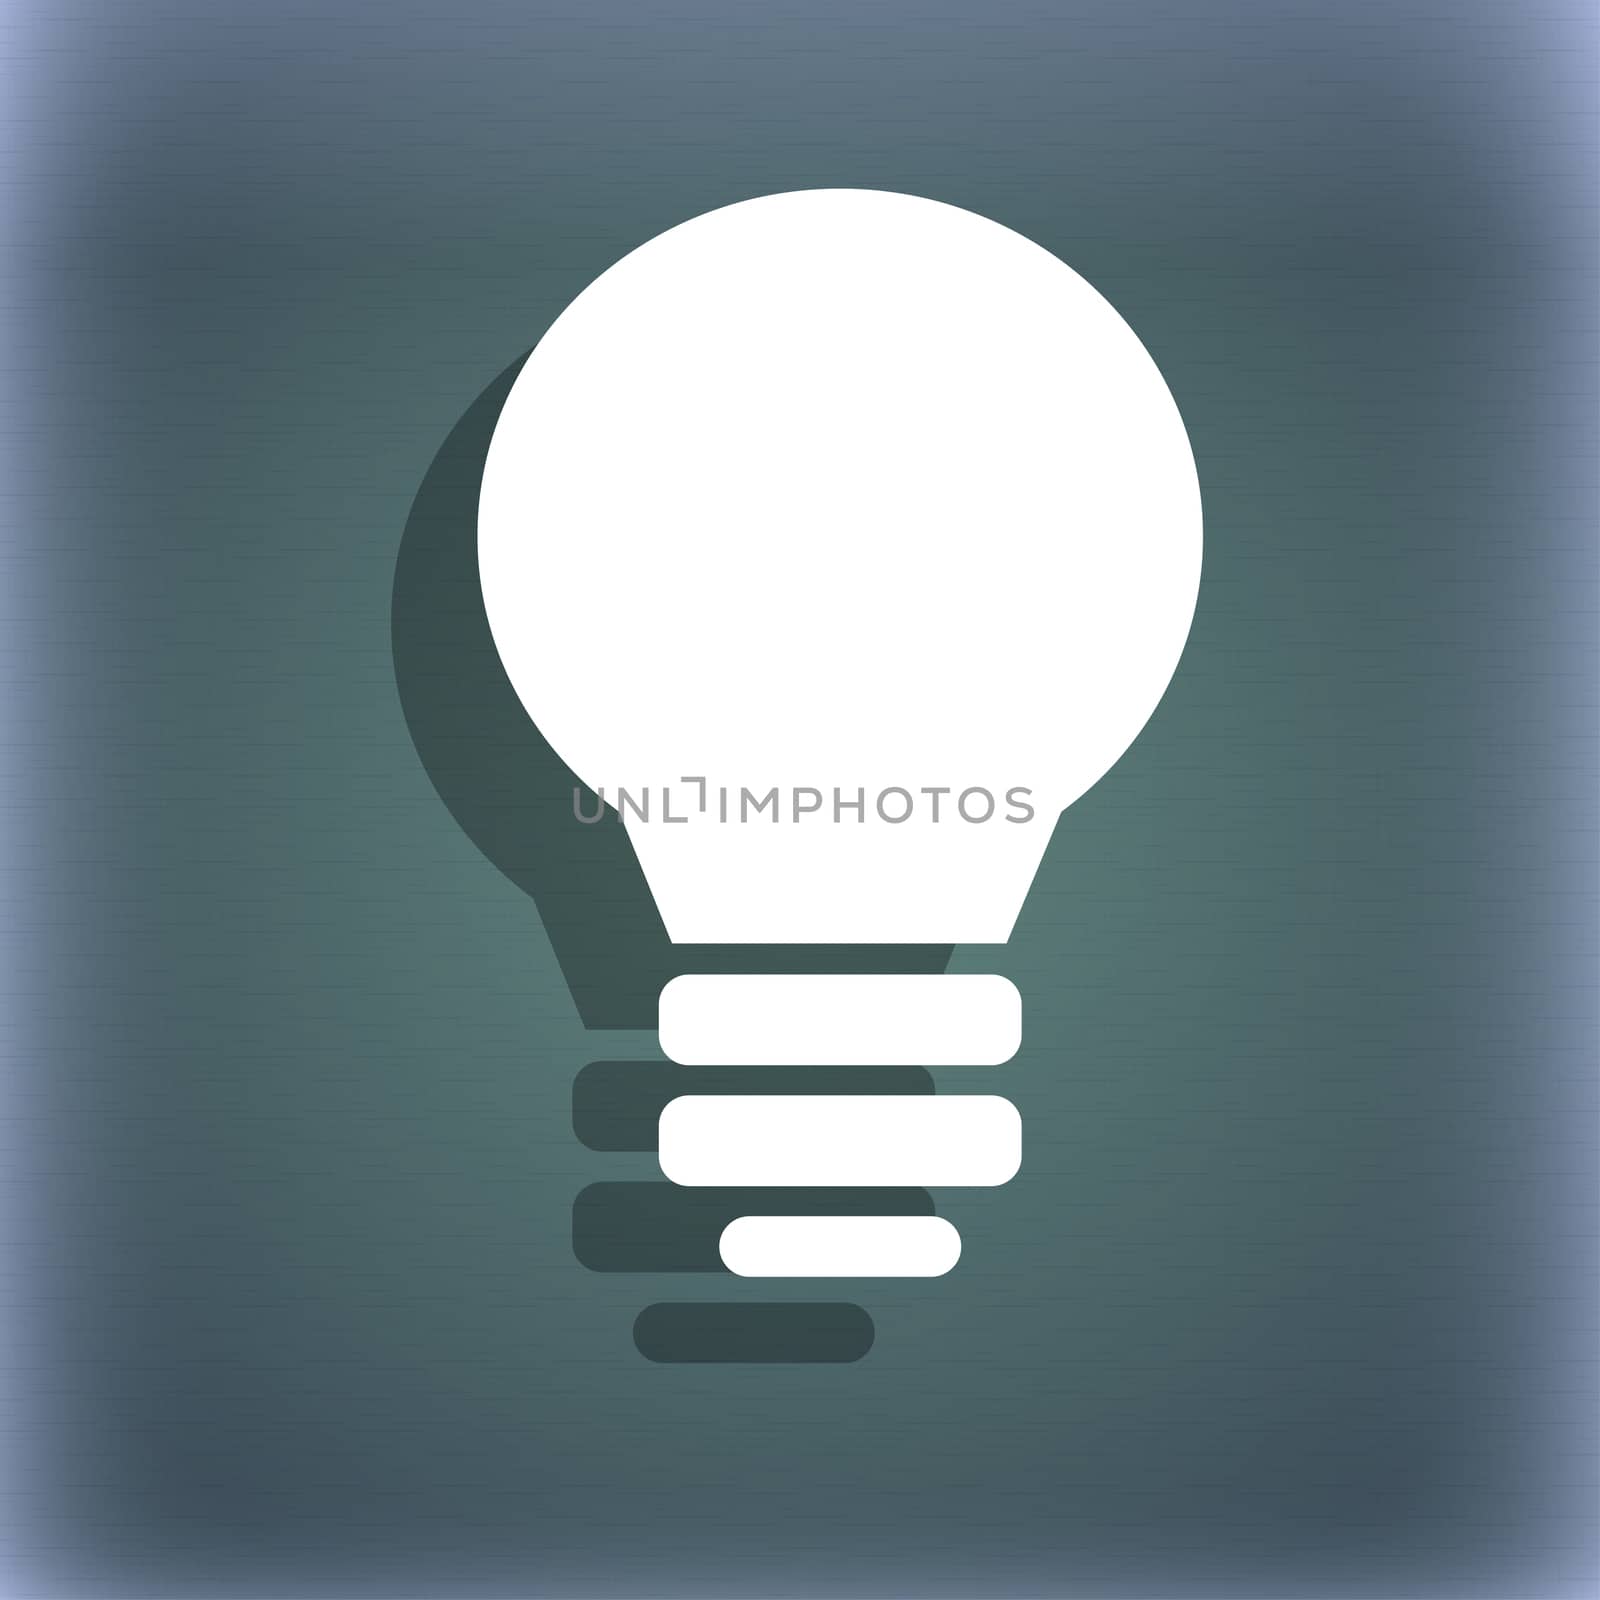 Light lamp, Idea icon symbol on the blue-green abstract background with shadow and space for your text. illustration